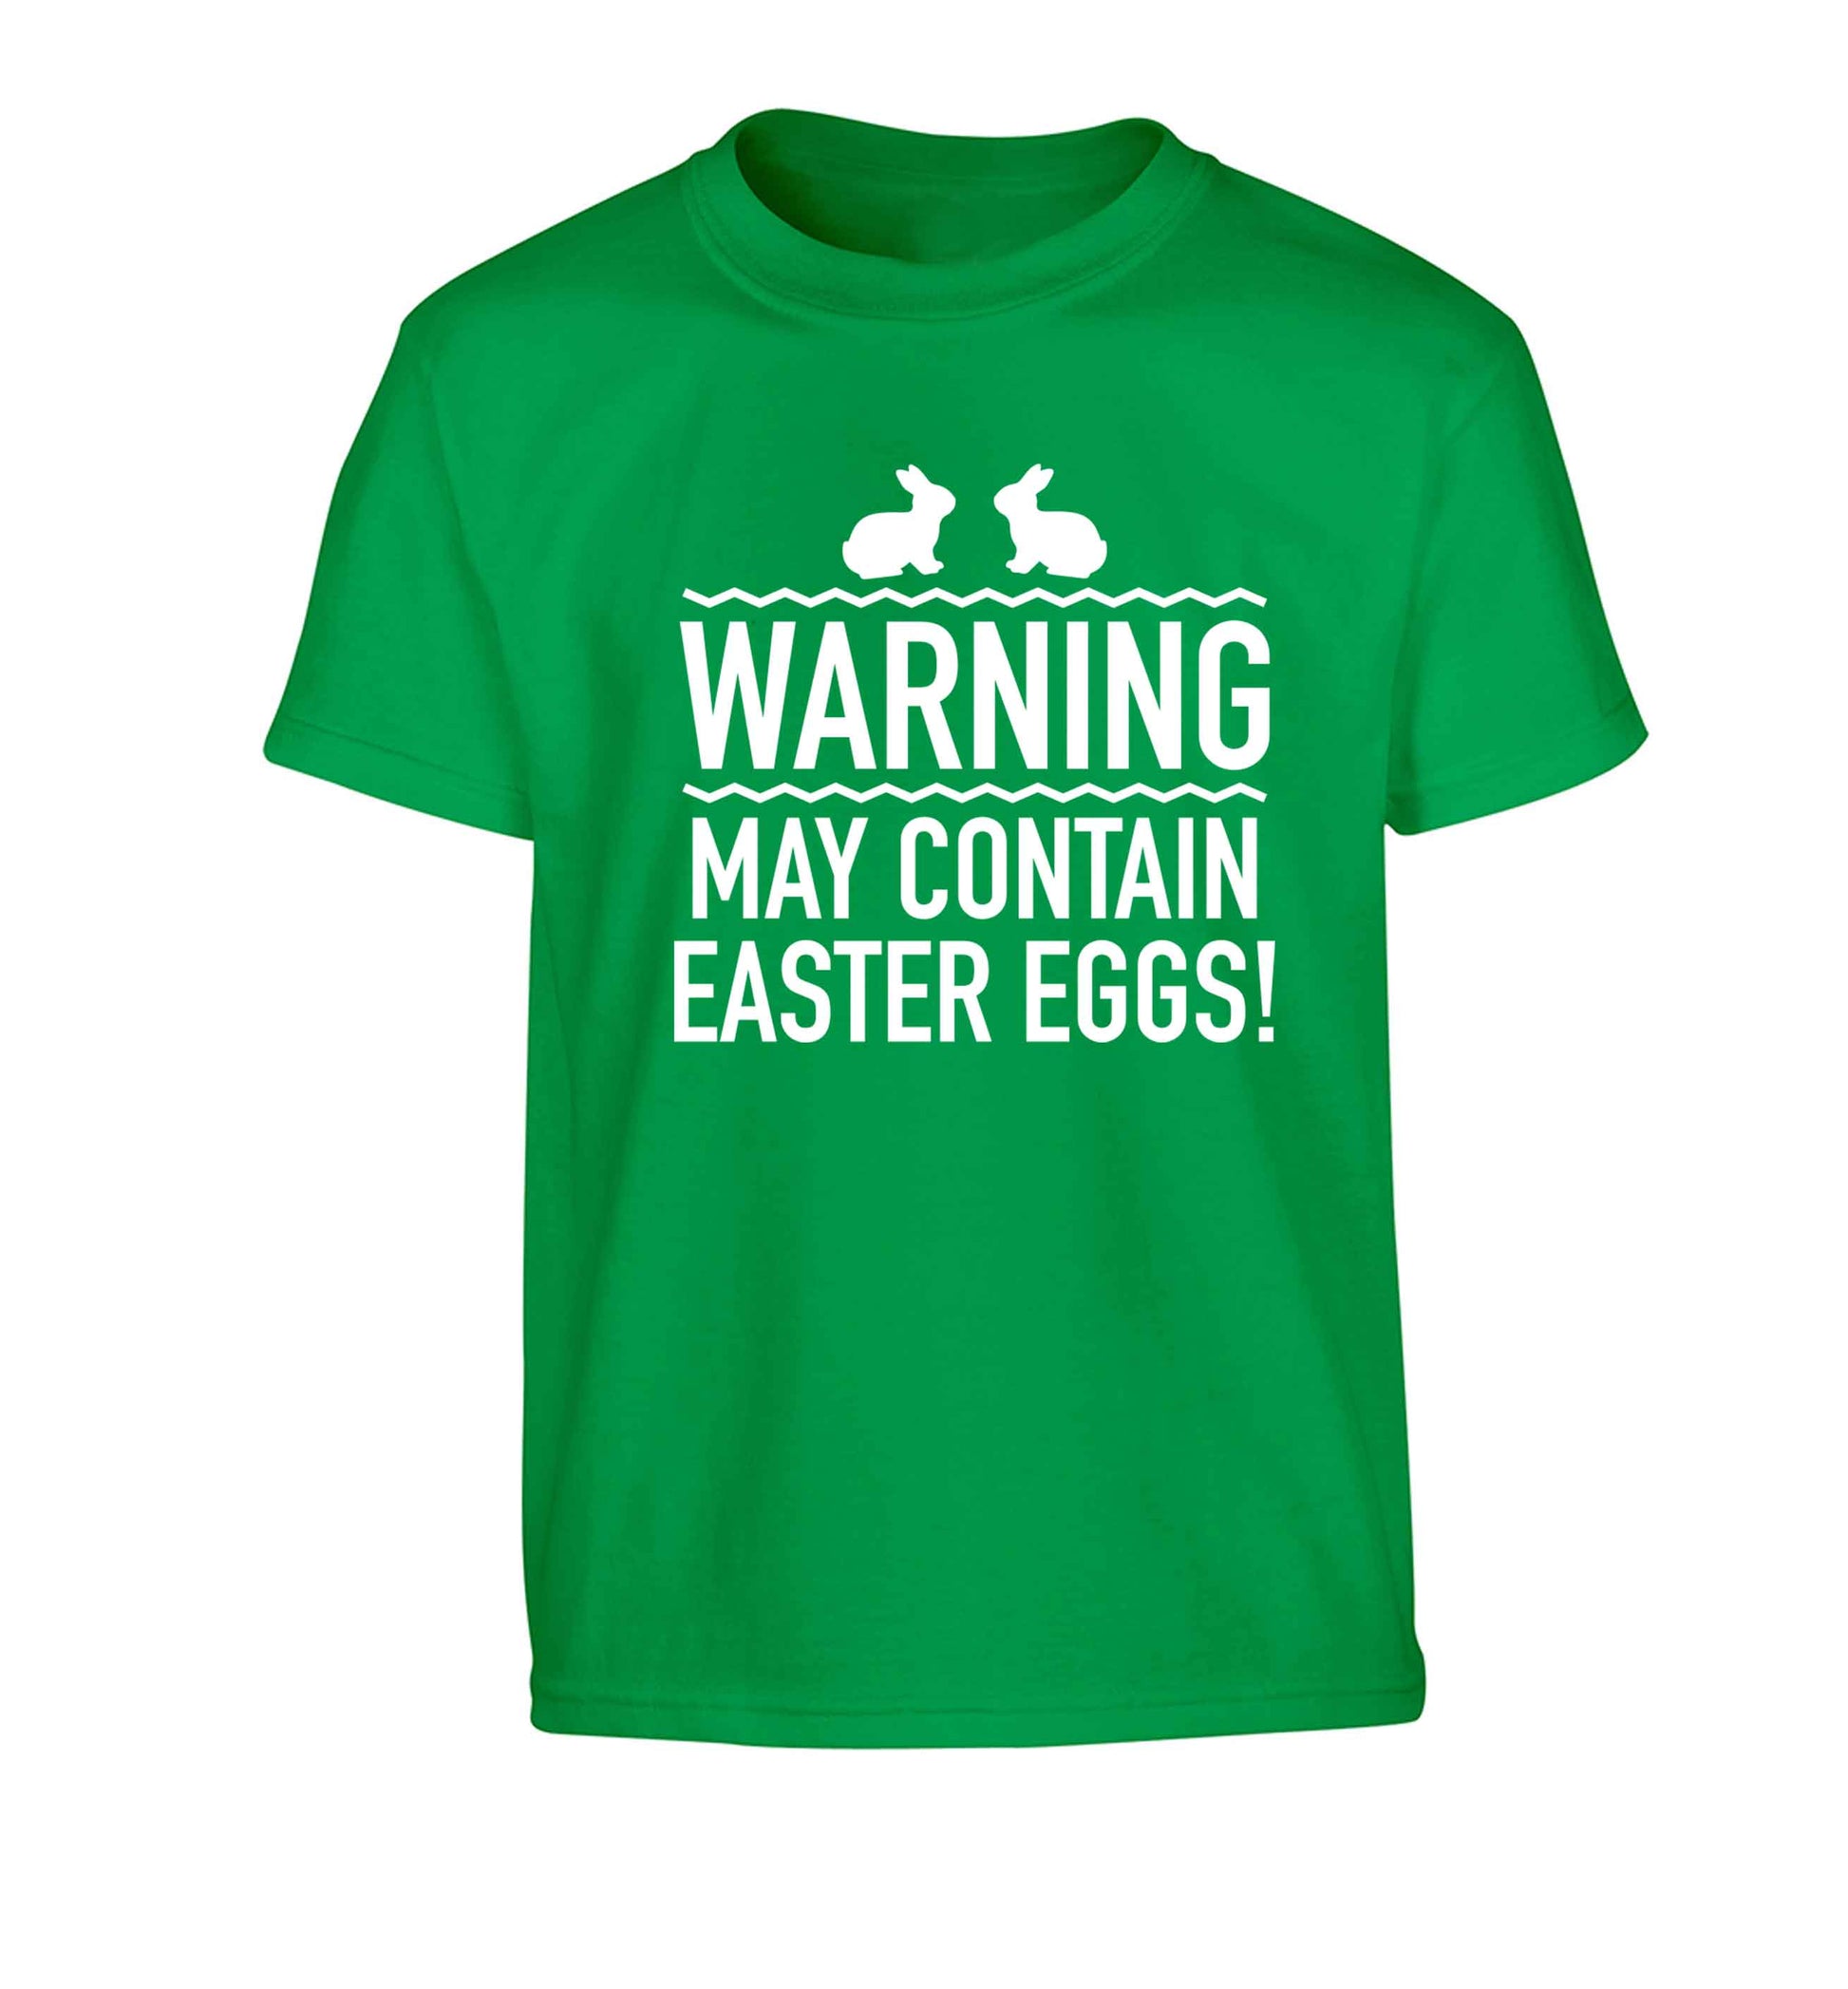 Warning may contain Easter eggs Children's green Tshirt 12-13 Years